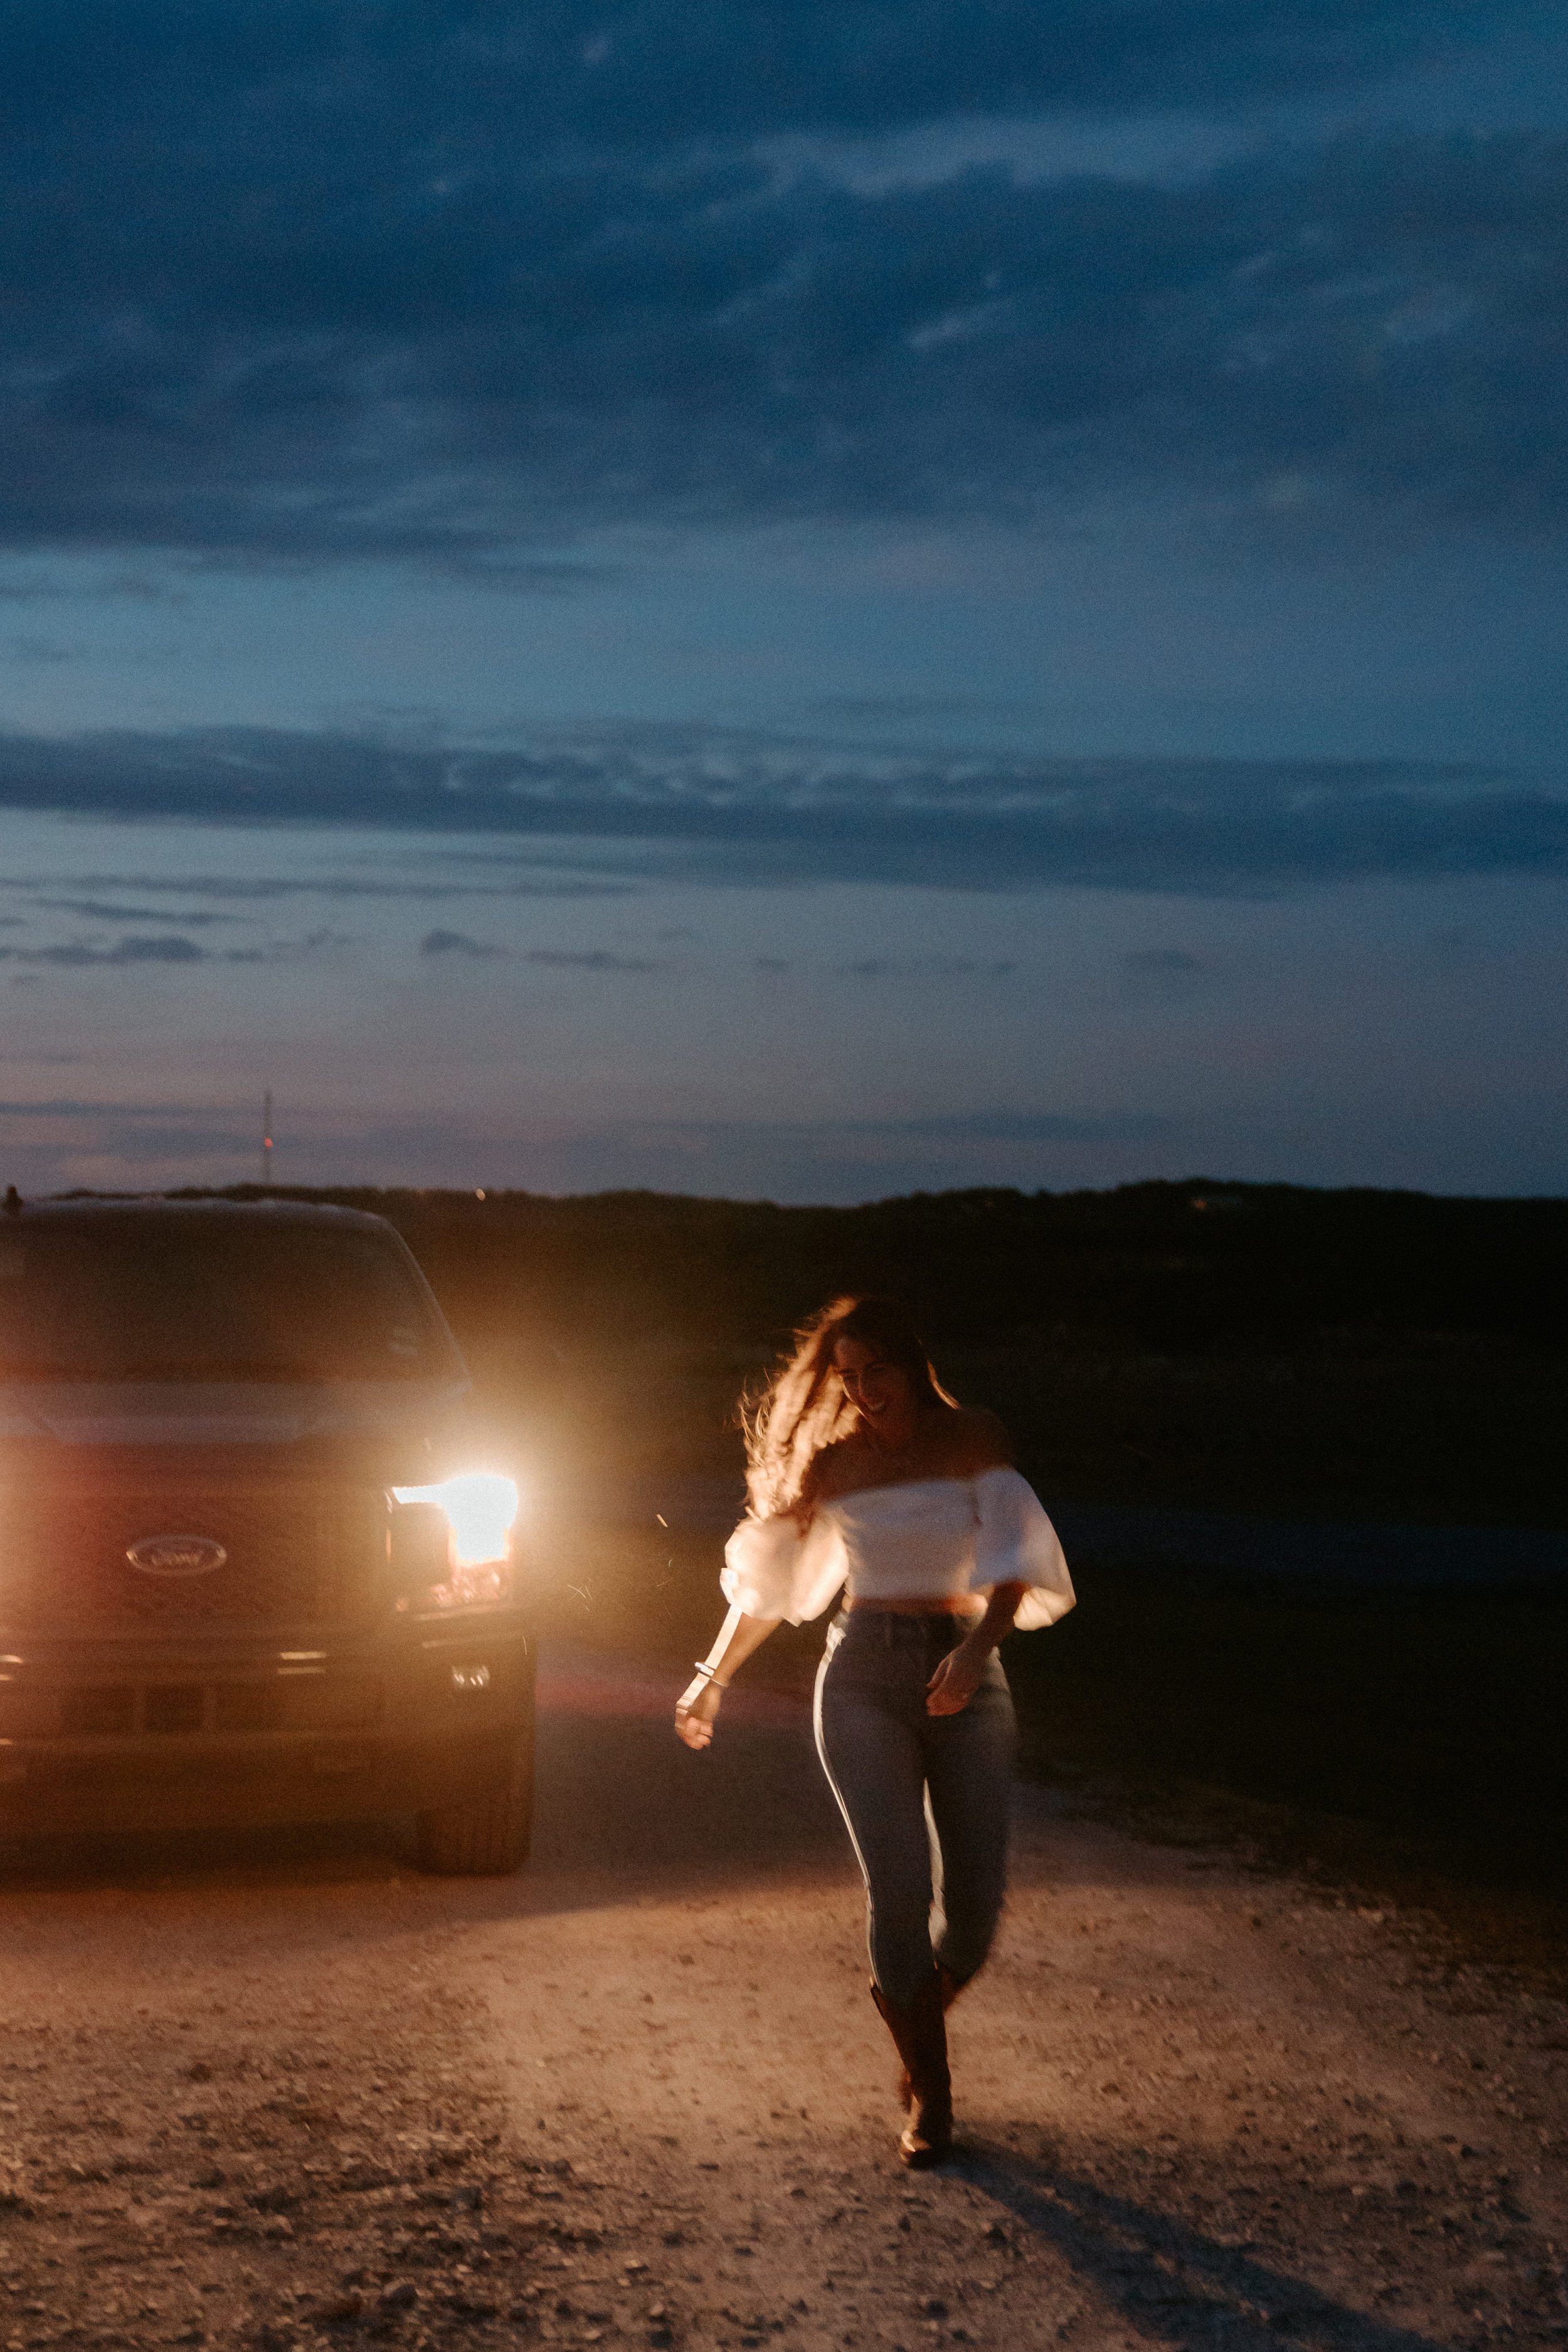 Woman dances with truck headlights in background.